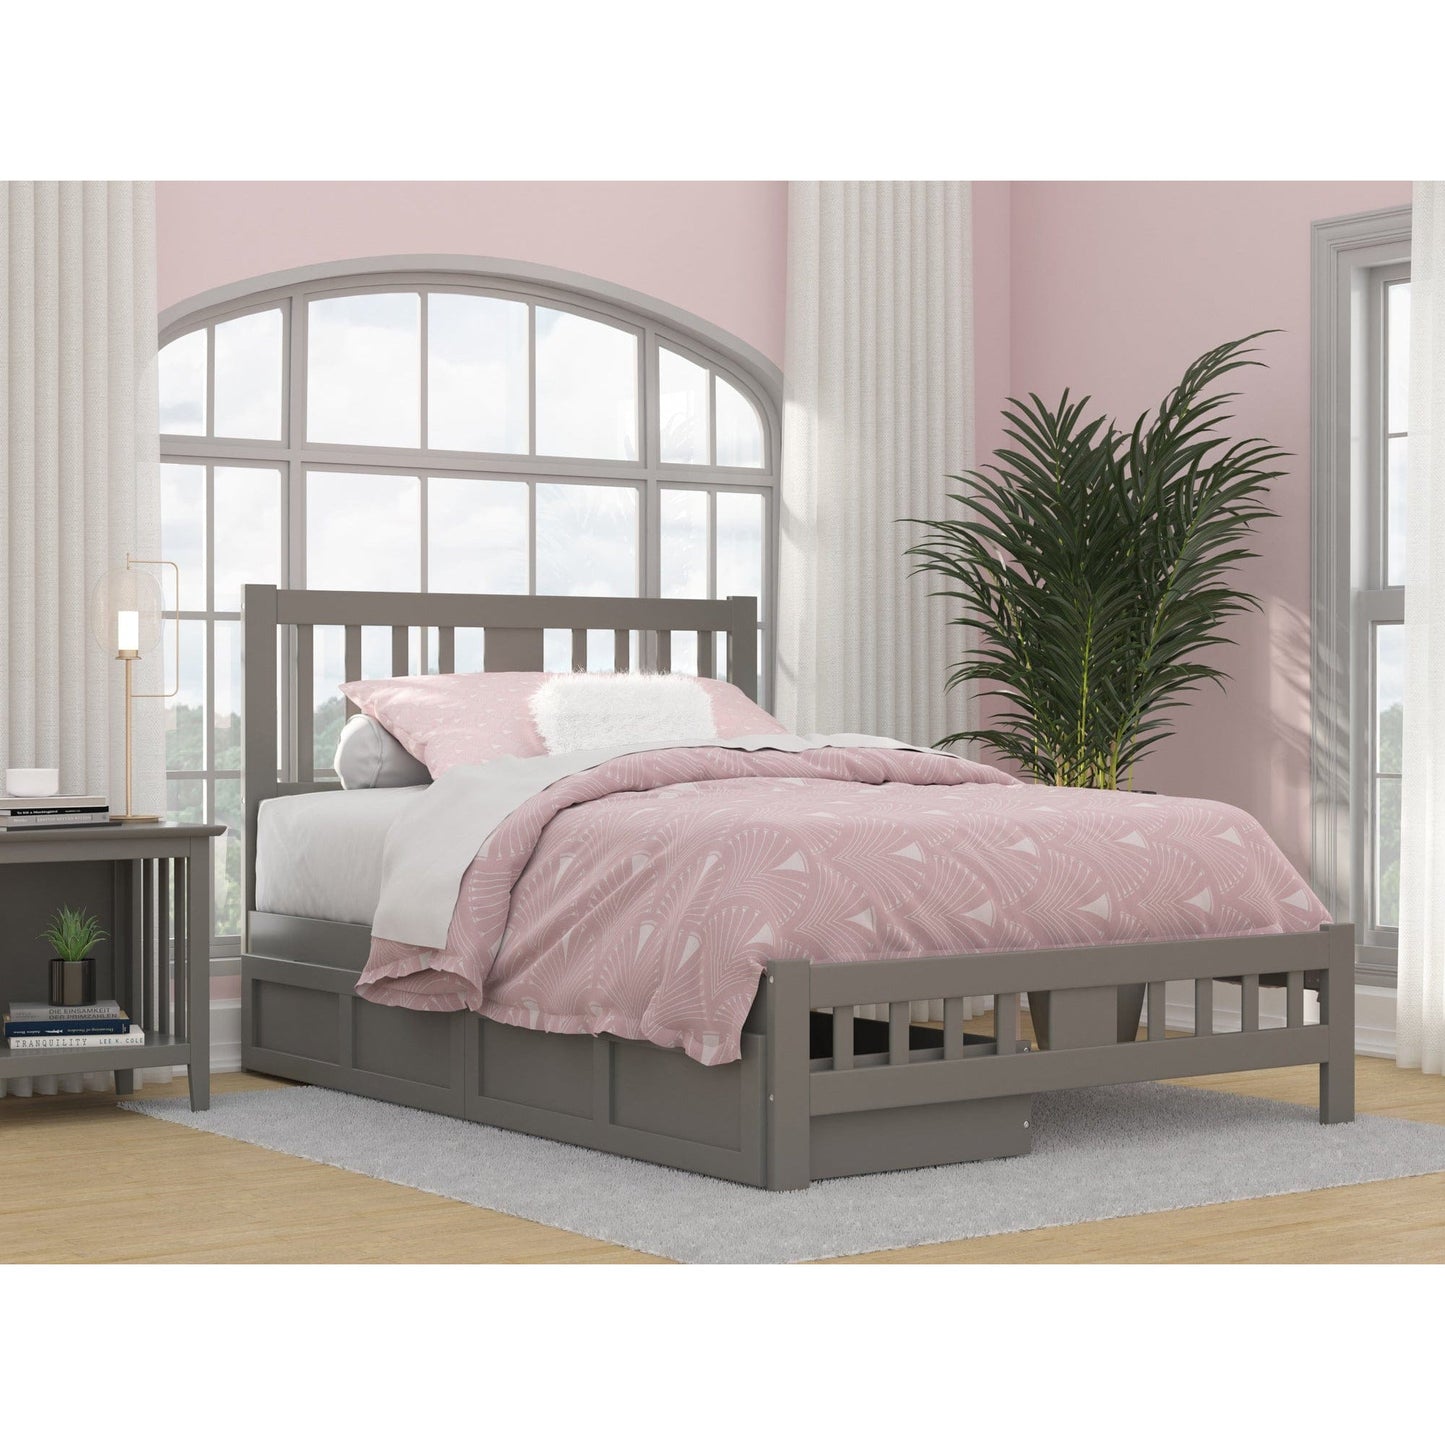 AFI Furnishings Tahoe Full Bed with Footboard and 2 Drawers in Grey AG8963339